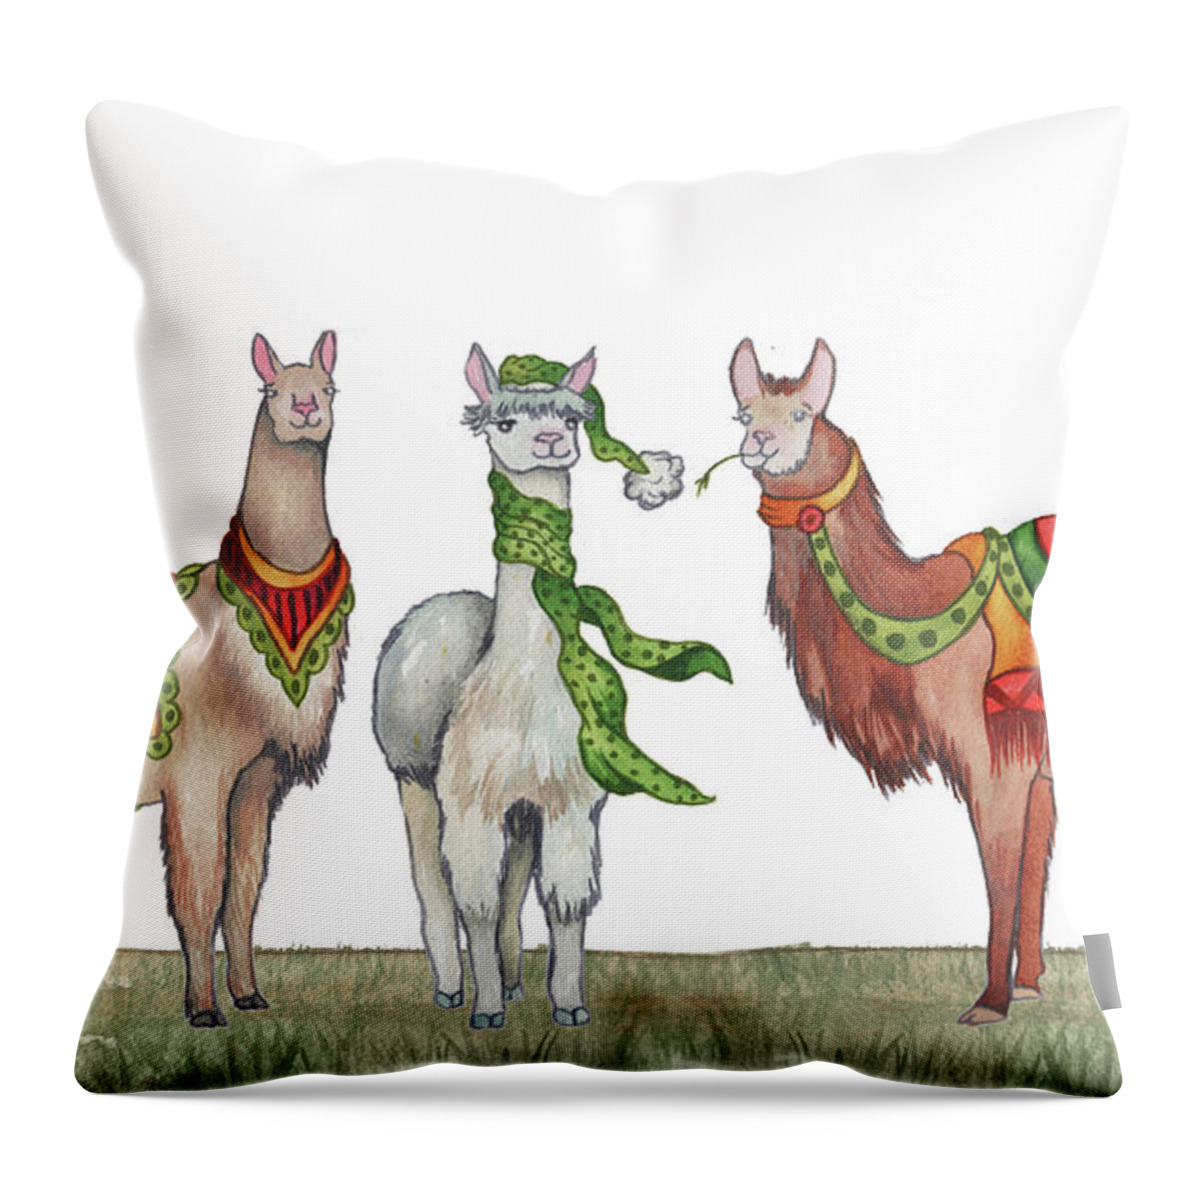 Christmas Throw Pillow featuring the painting Christmas Llamas by Elizabeth Medley